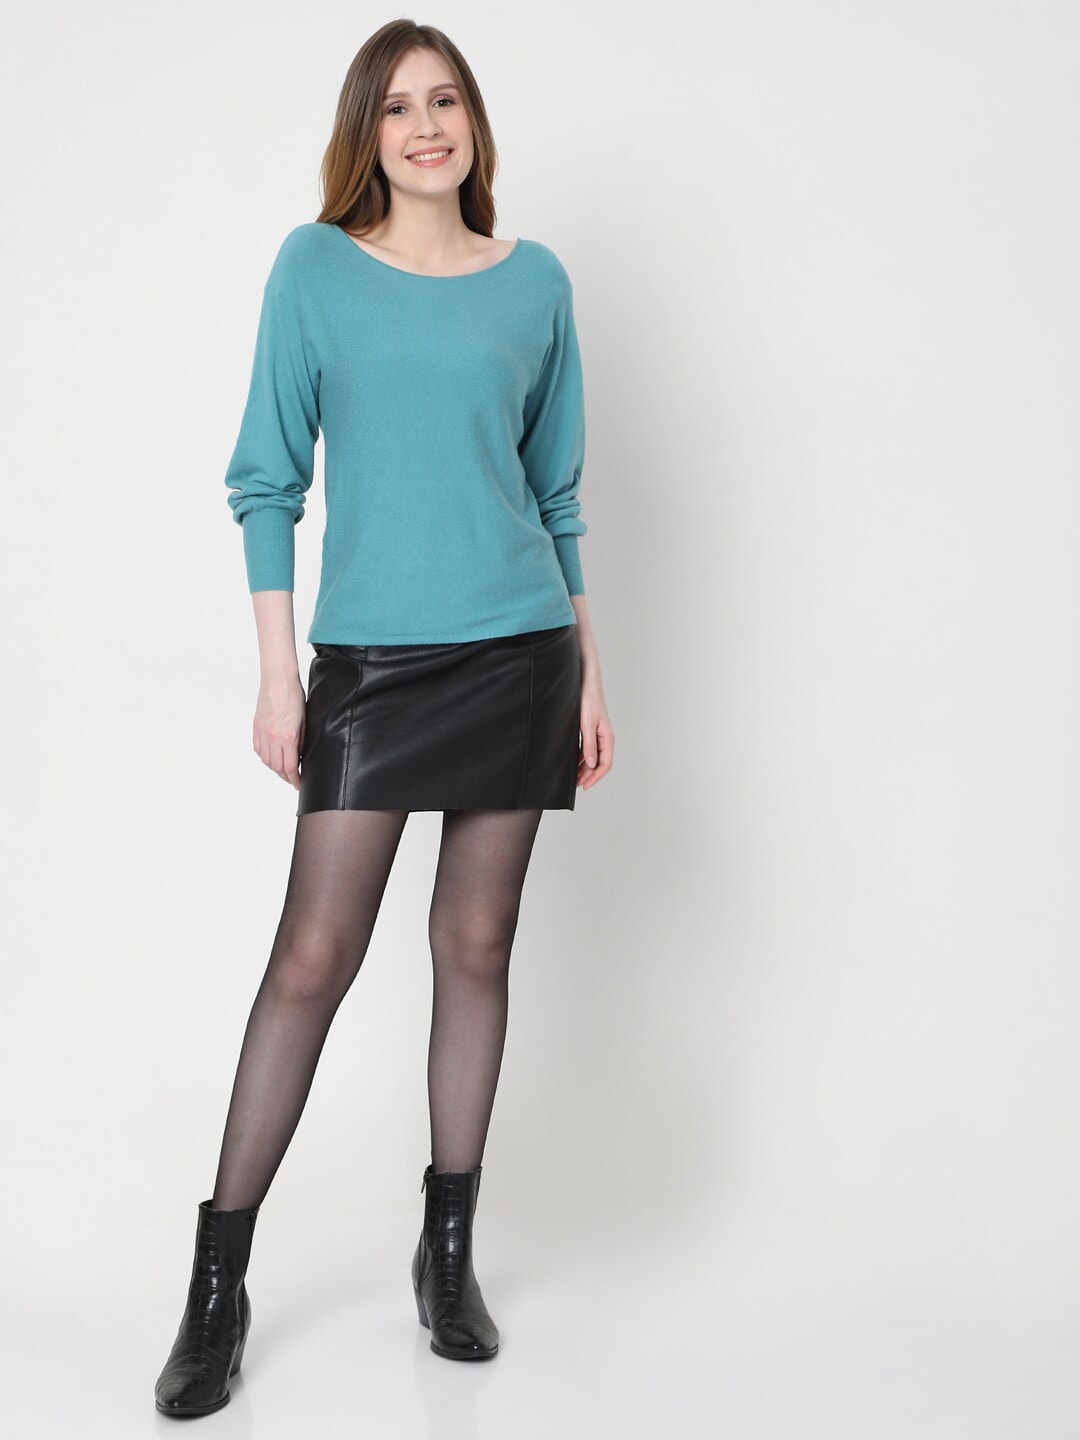 Vero Moda Women Turquoise Blue Solid Cuffed Sleeves Pullover Price in India